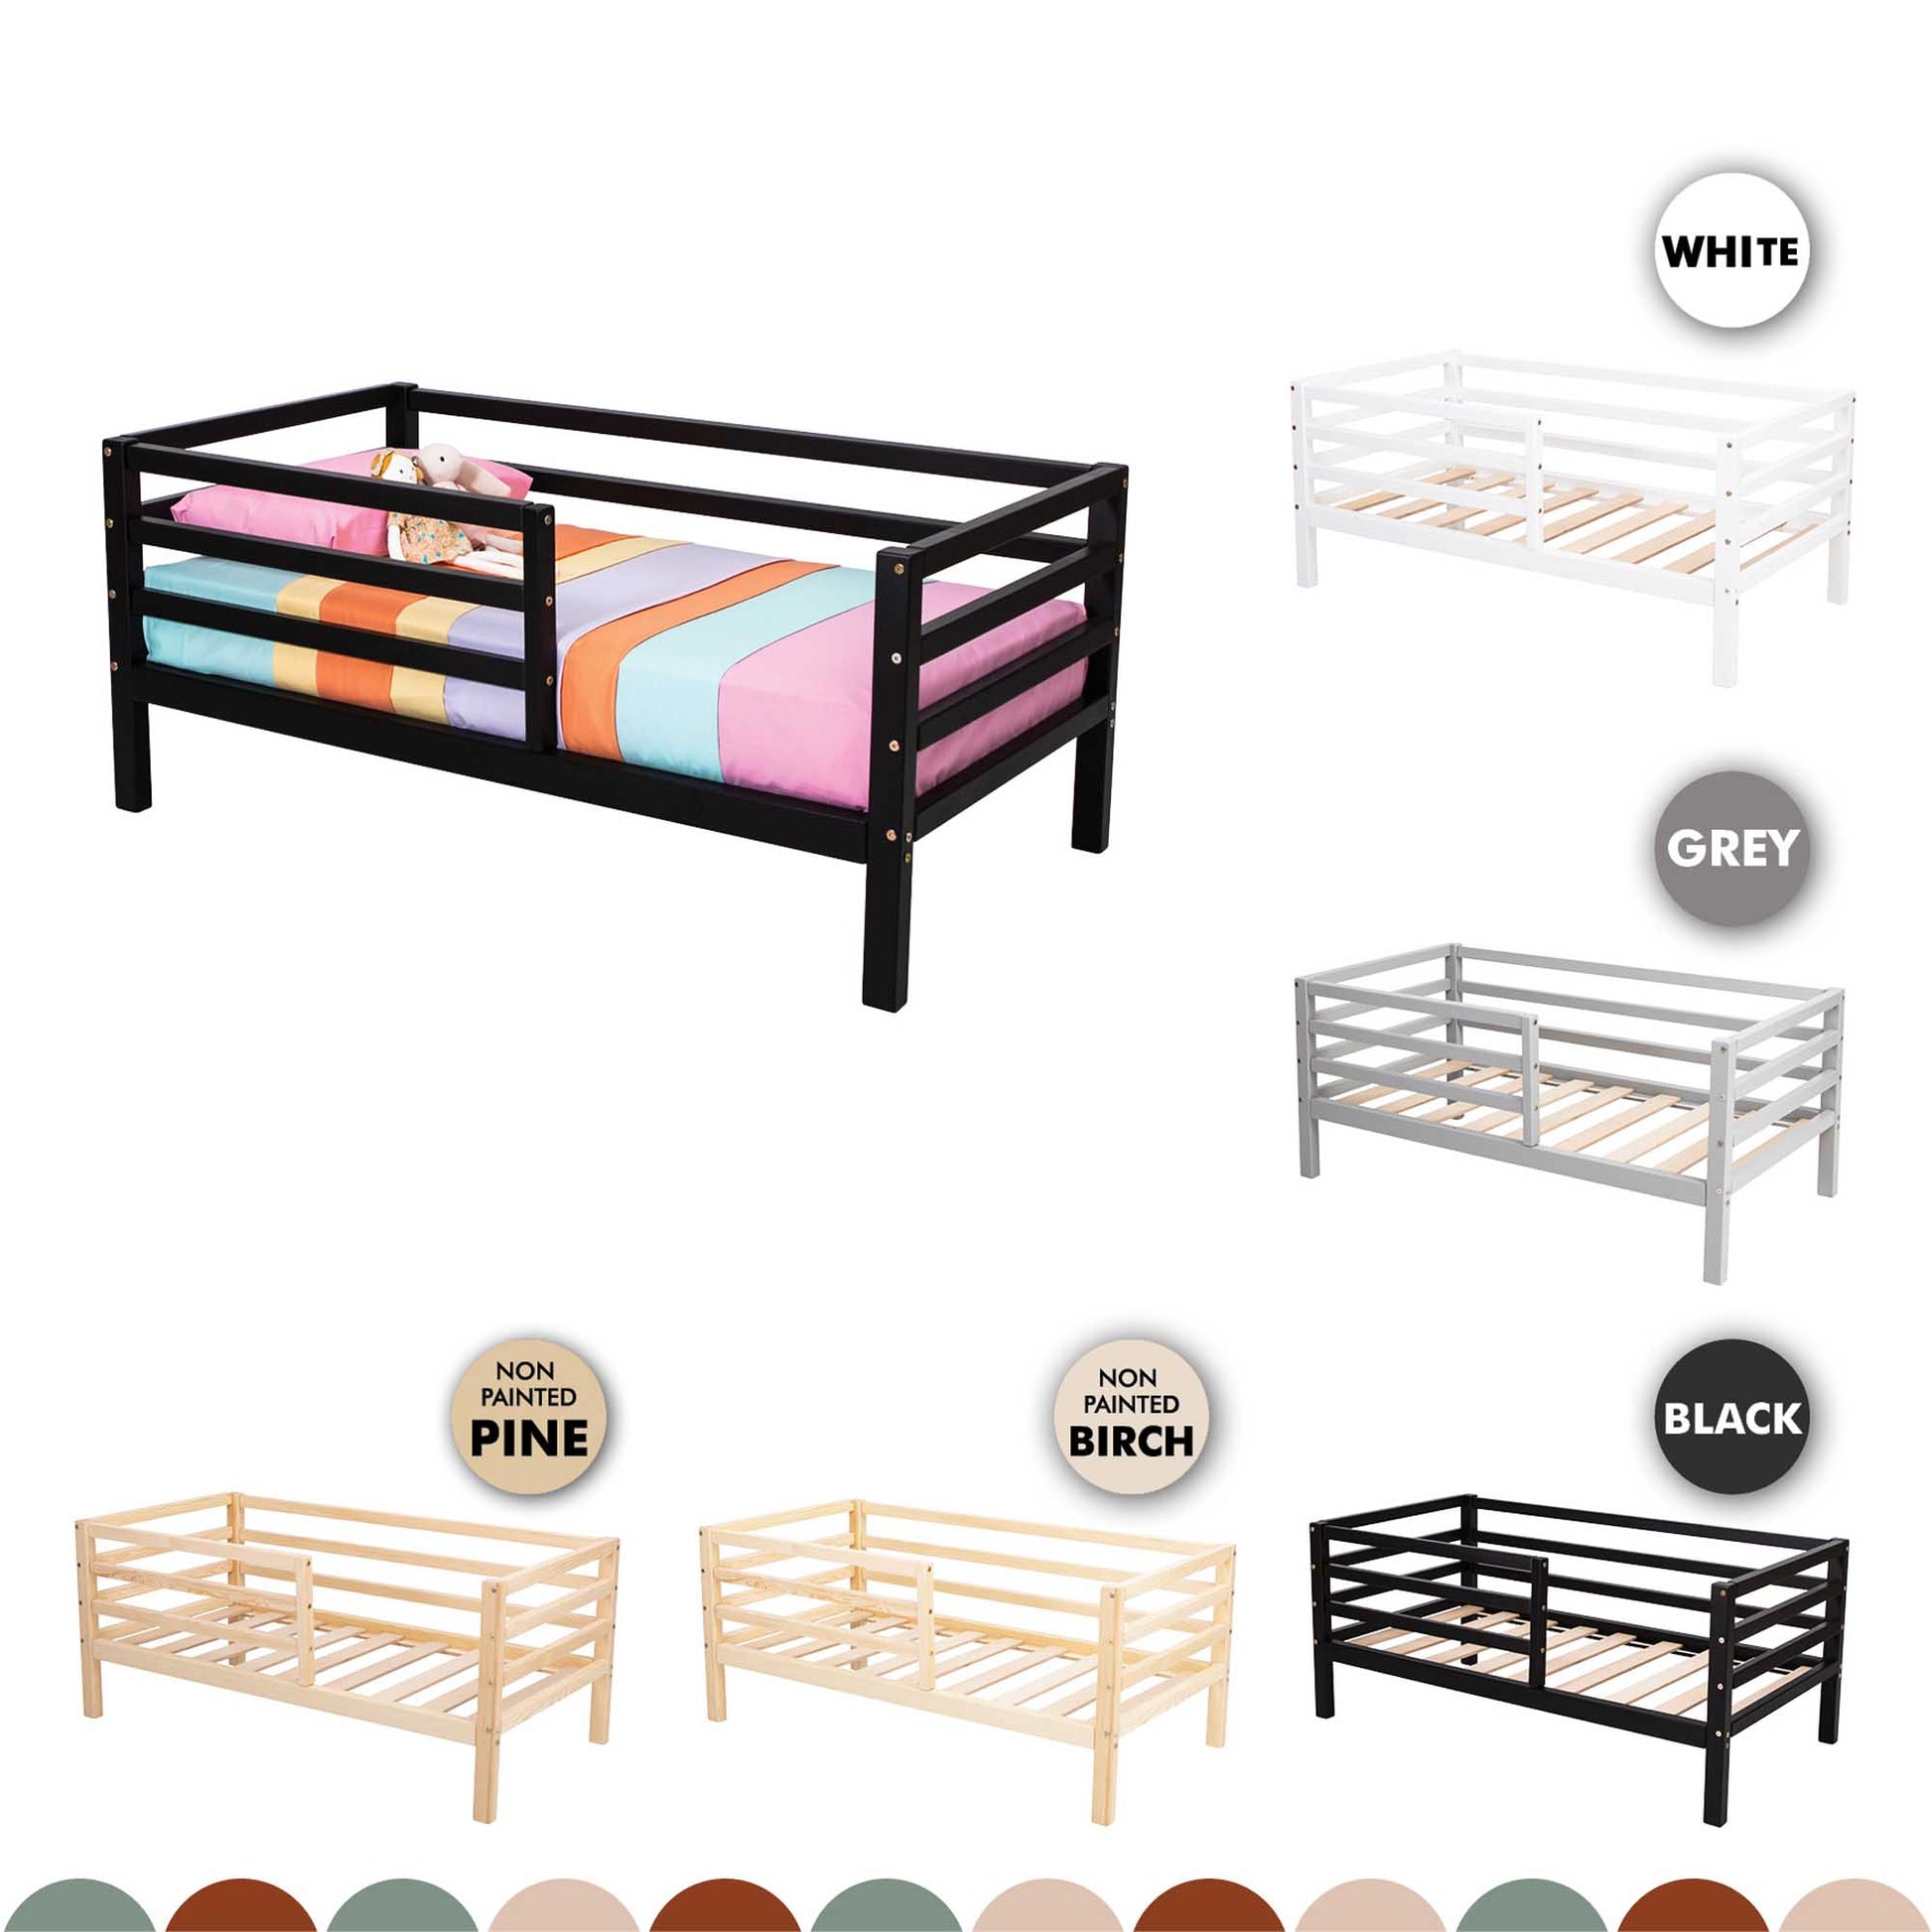 A Sweet Home From Wood Montessori-inspired toddler bed with a horizontal rail fence, available in different colors and styles.